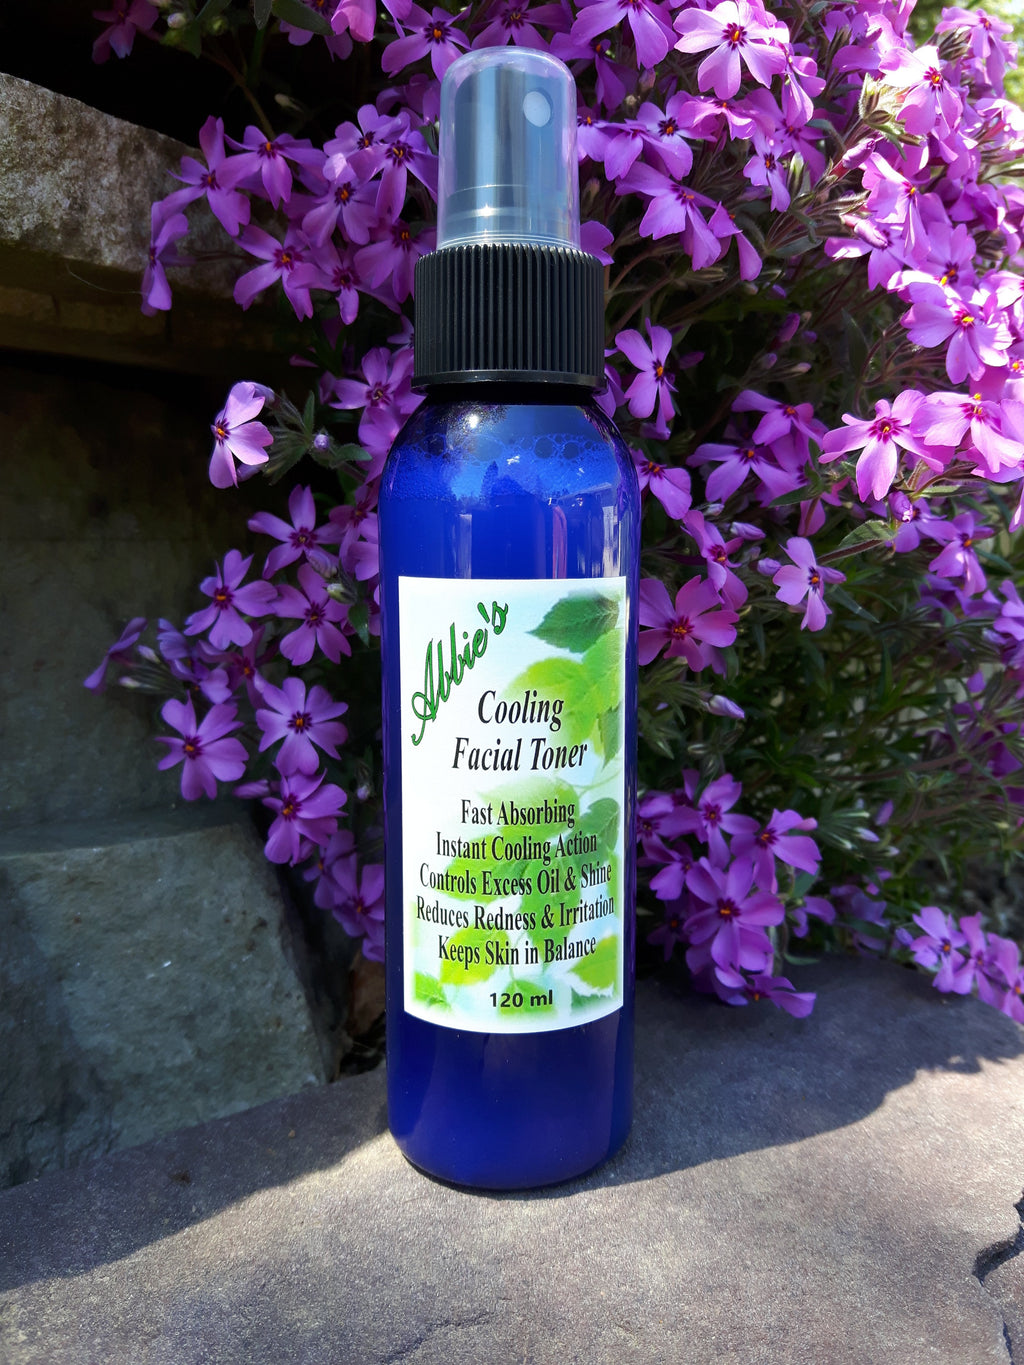 Cooling Facial Toner 120ml - Abbie's Natural Skin Care Products